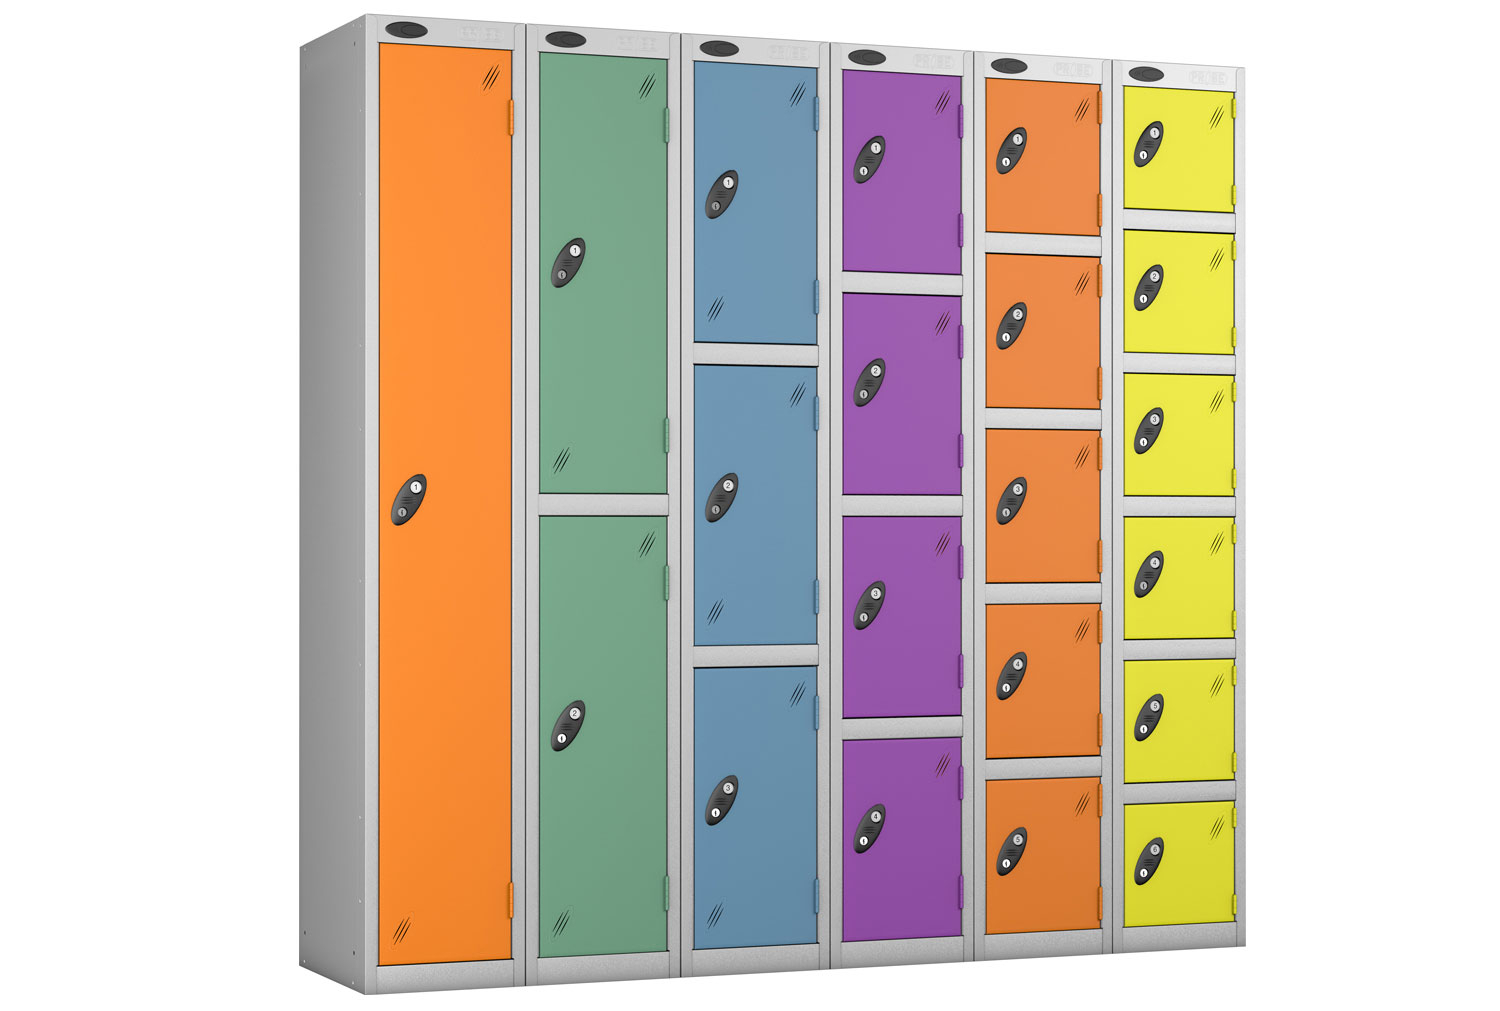 Probe Autumn Colour Lockers With Silver Body, 5 Door, 31wx46dx178h (cm), Combination Lock, Silver Body, Lilac